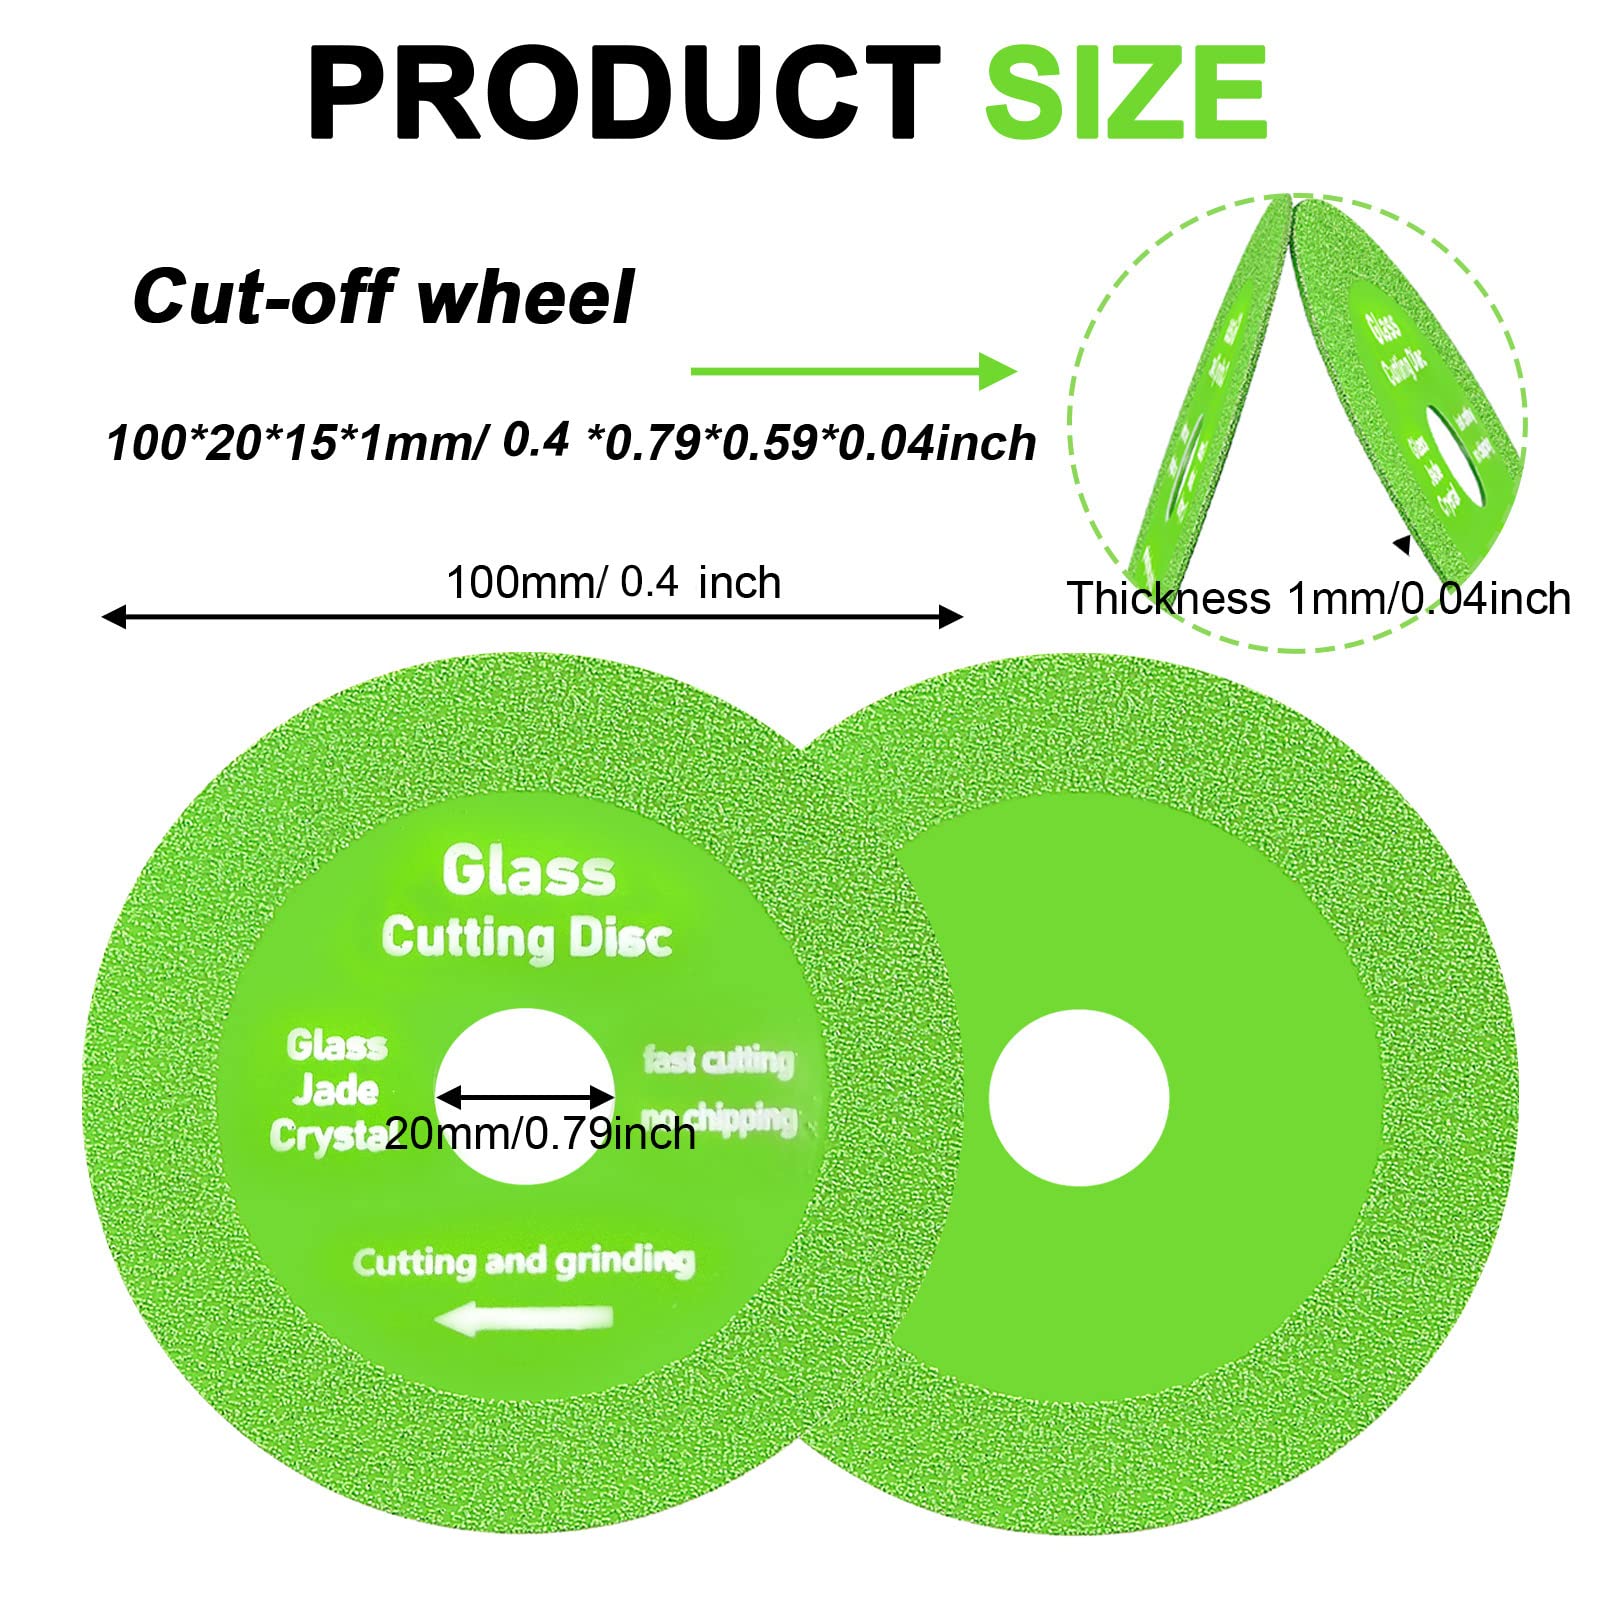 Glass Cutting Disc Pack of 5, Ultra-Thin Diamond Cutting Disc Saw Blade Suitable for 4 Inch Angle Grinder, Diamond Cut Off Wheels for Glass Ceramic Diamond Marble Jade Crystal Cutting Sand Wheel